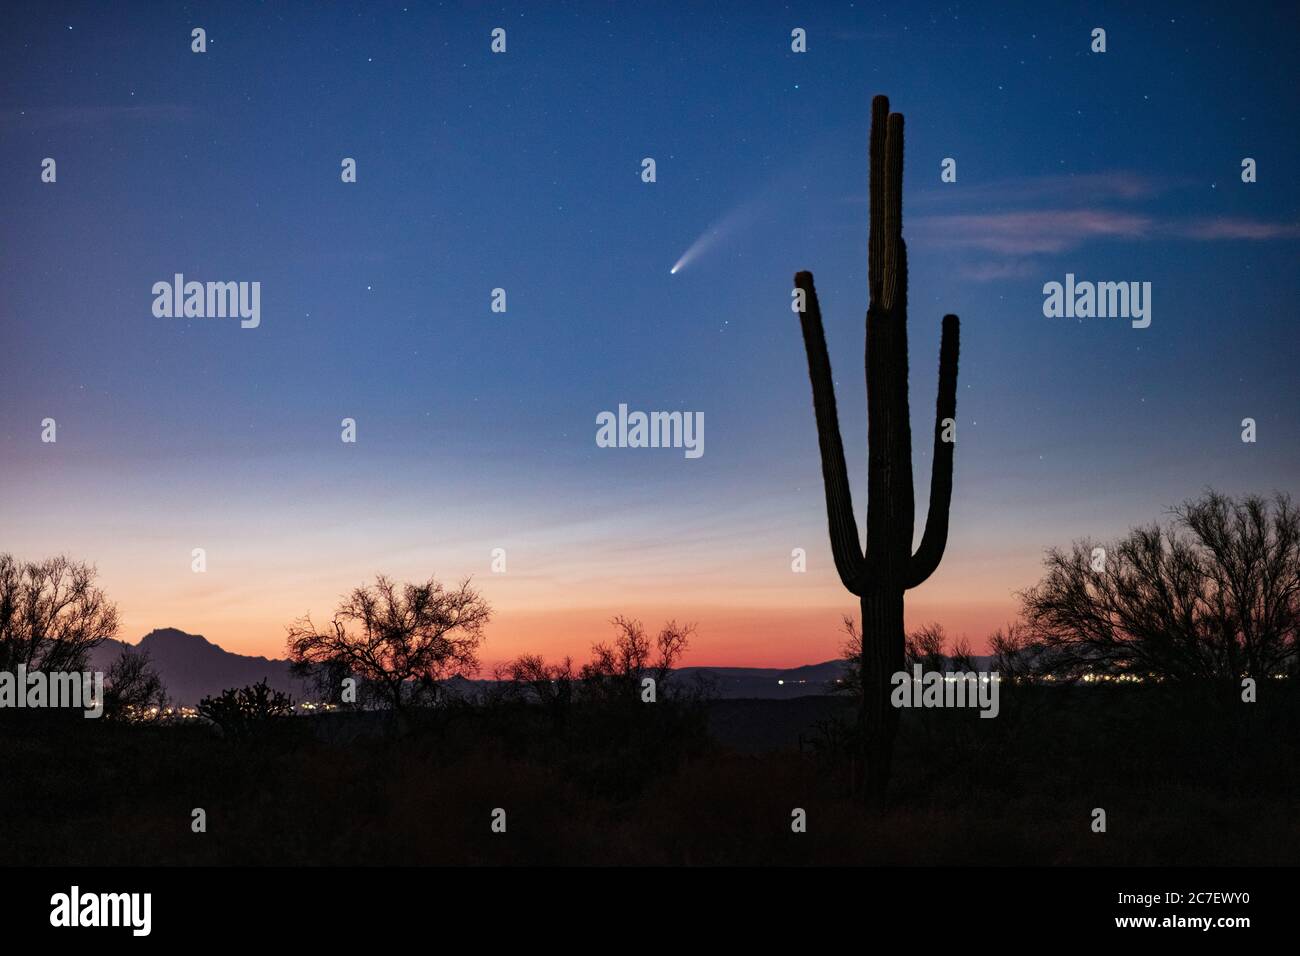 Scenic desert landscape with Comet Neowise behind a Saguaro Cactus and sunset sky near Phoenix, Arizona Stock Photo